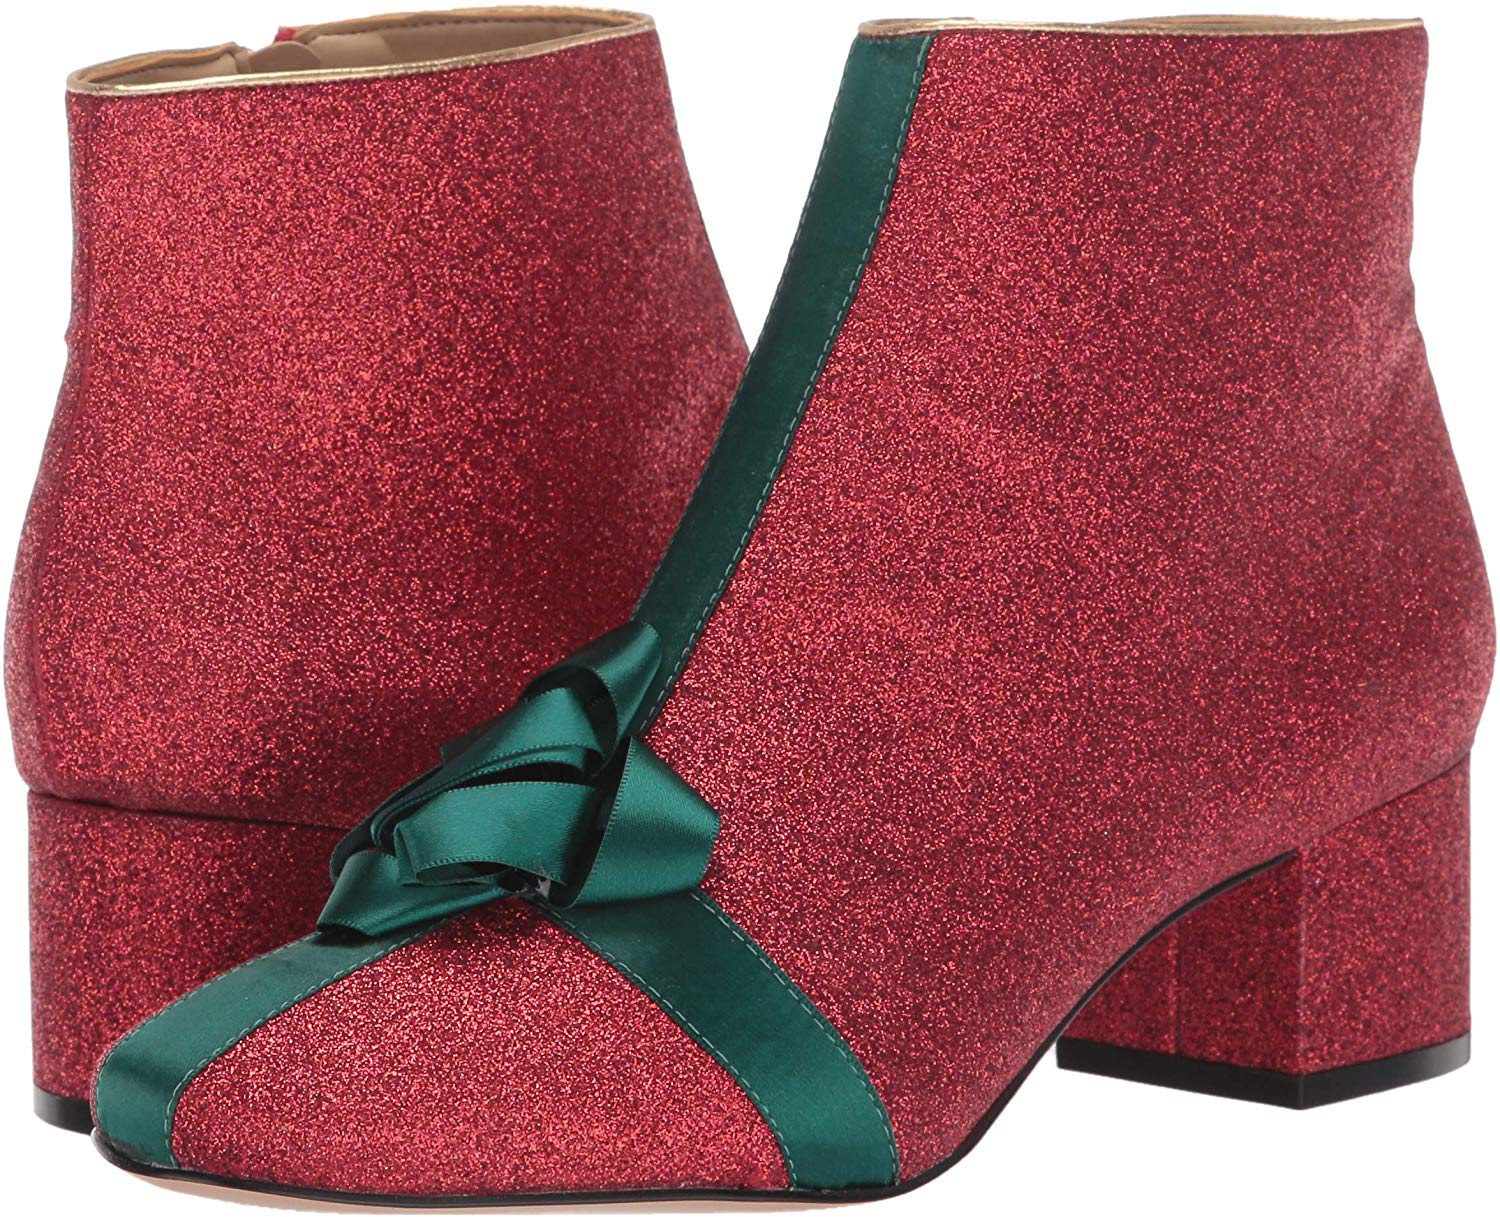 Katy Perry Women's The Gifter Ankle Boot, Red, Size 10.0 jFCD | eBay